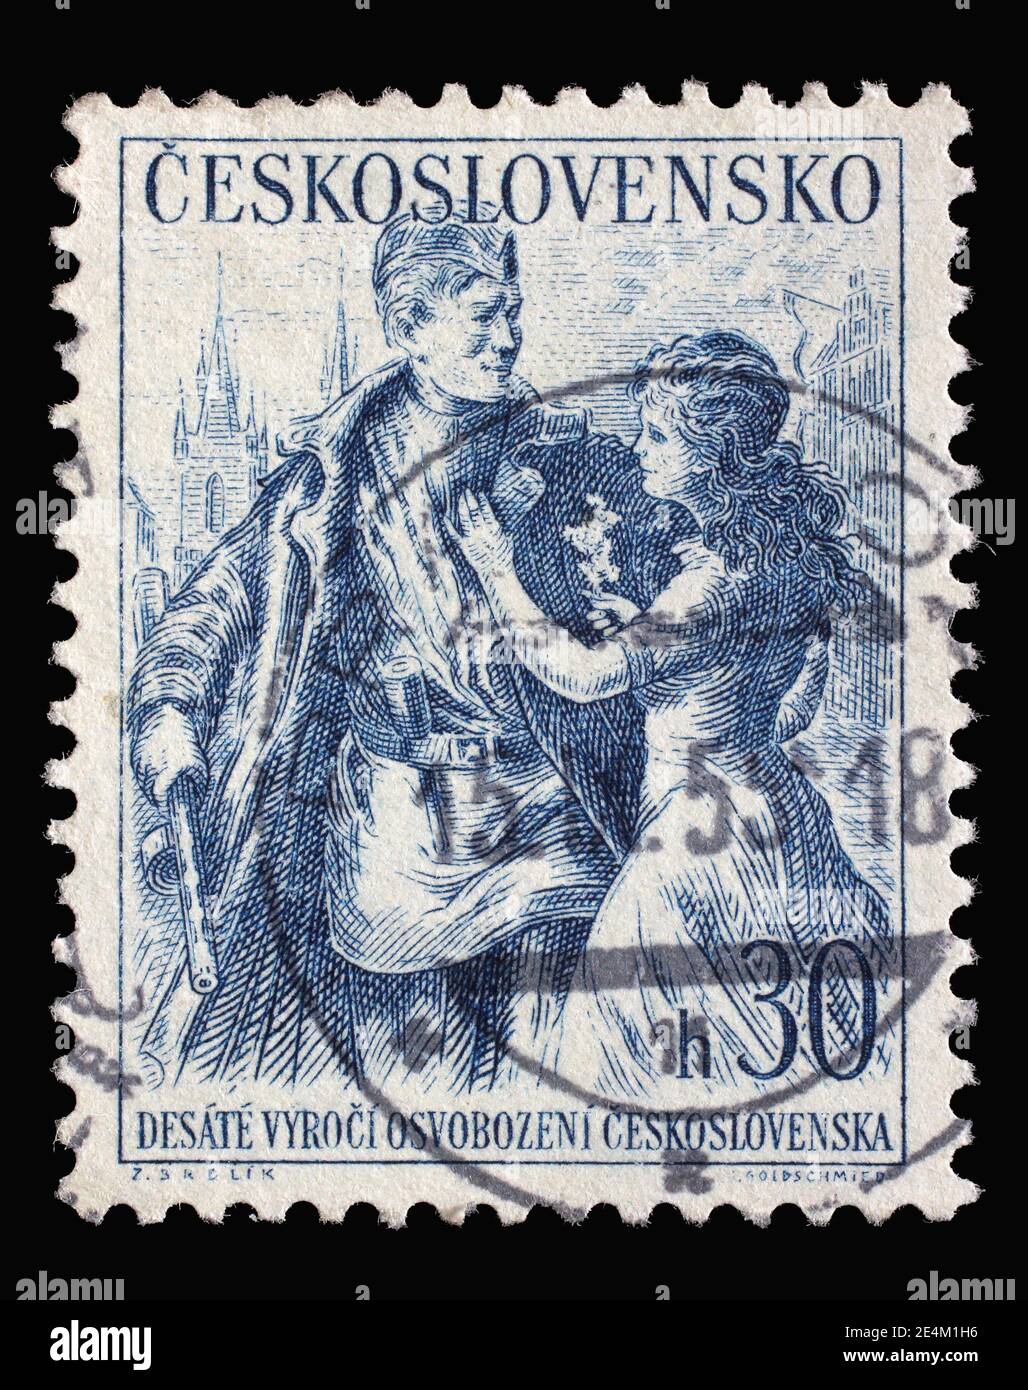 Stamp Printed In Czechoslovakia Shows Woman Decorating Soviet Soldier Liberation Of 